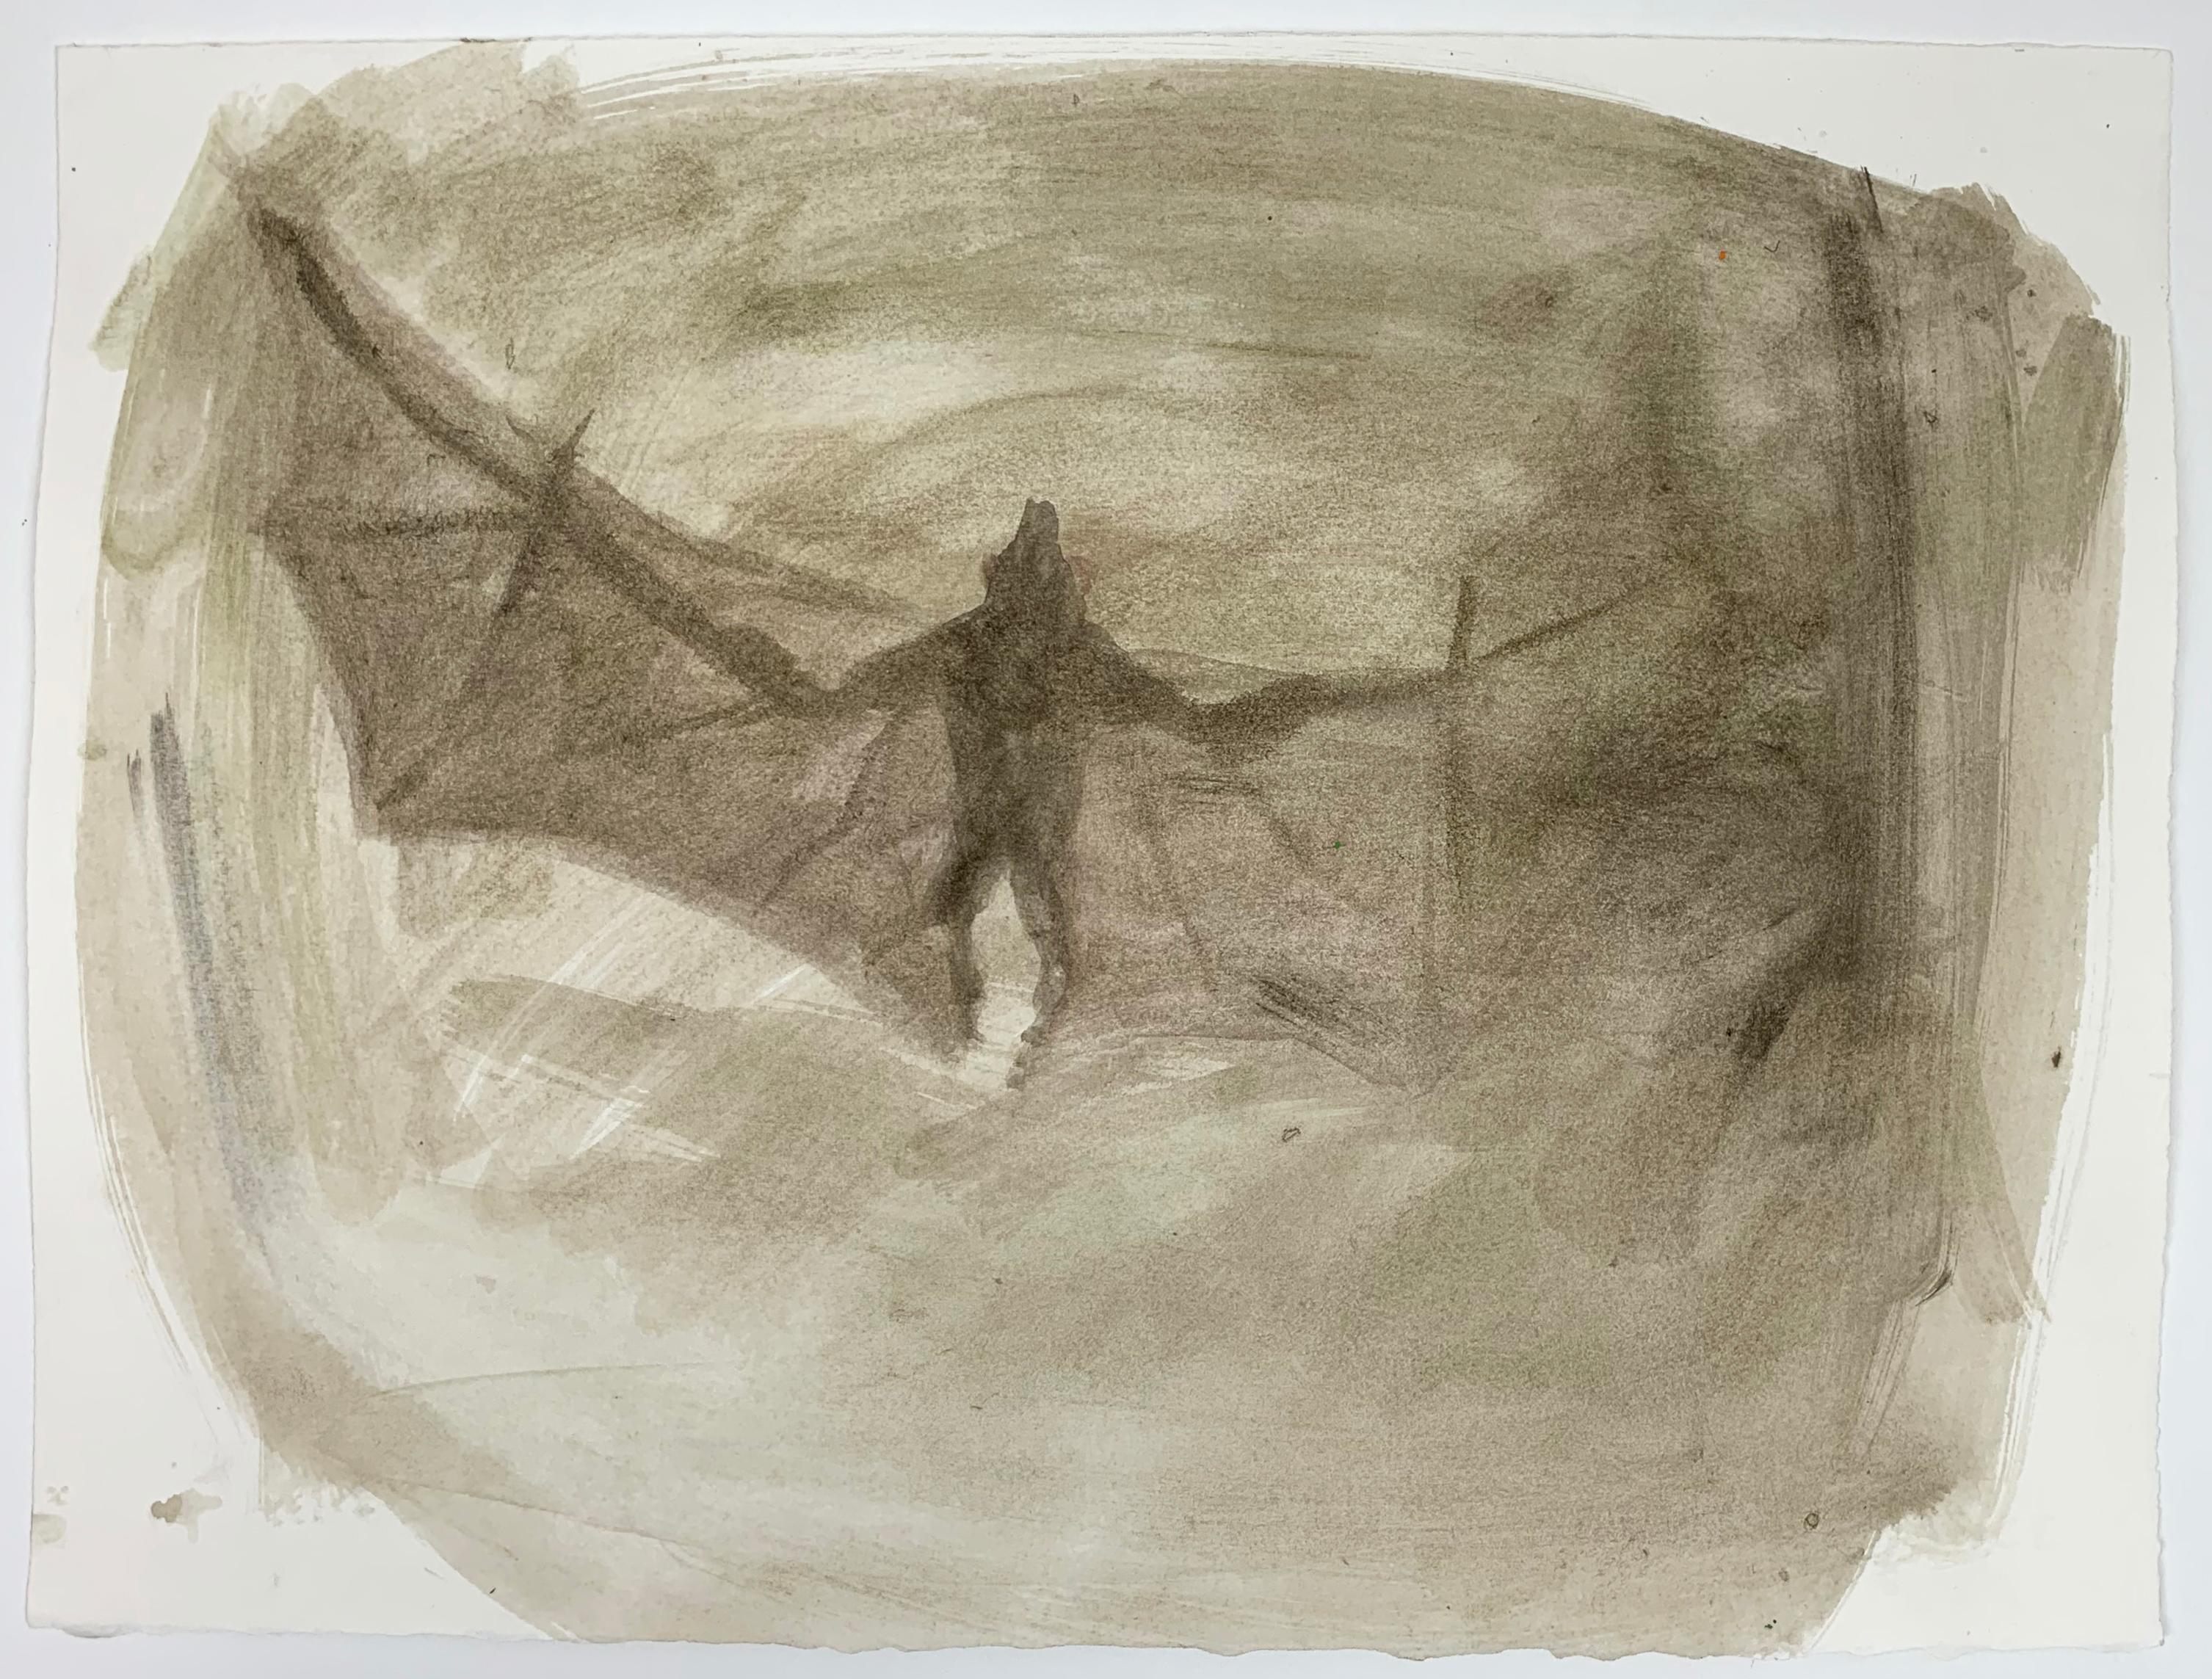 A watercolor on paper by Jasper Hagenaar of bat in the darkness. A memory of these surreal corona times.  

Sincerity and light playfulness coexist within the scope of boyhood in a merely broad yet autobiographical sense within Jasper Hagenaar’s